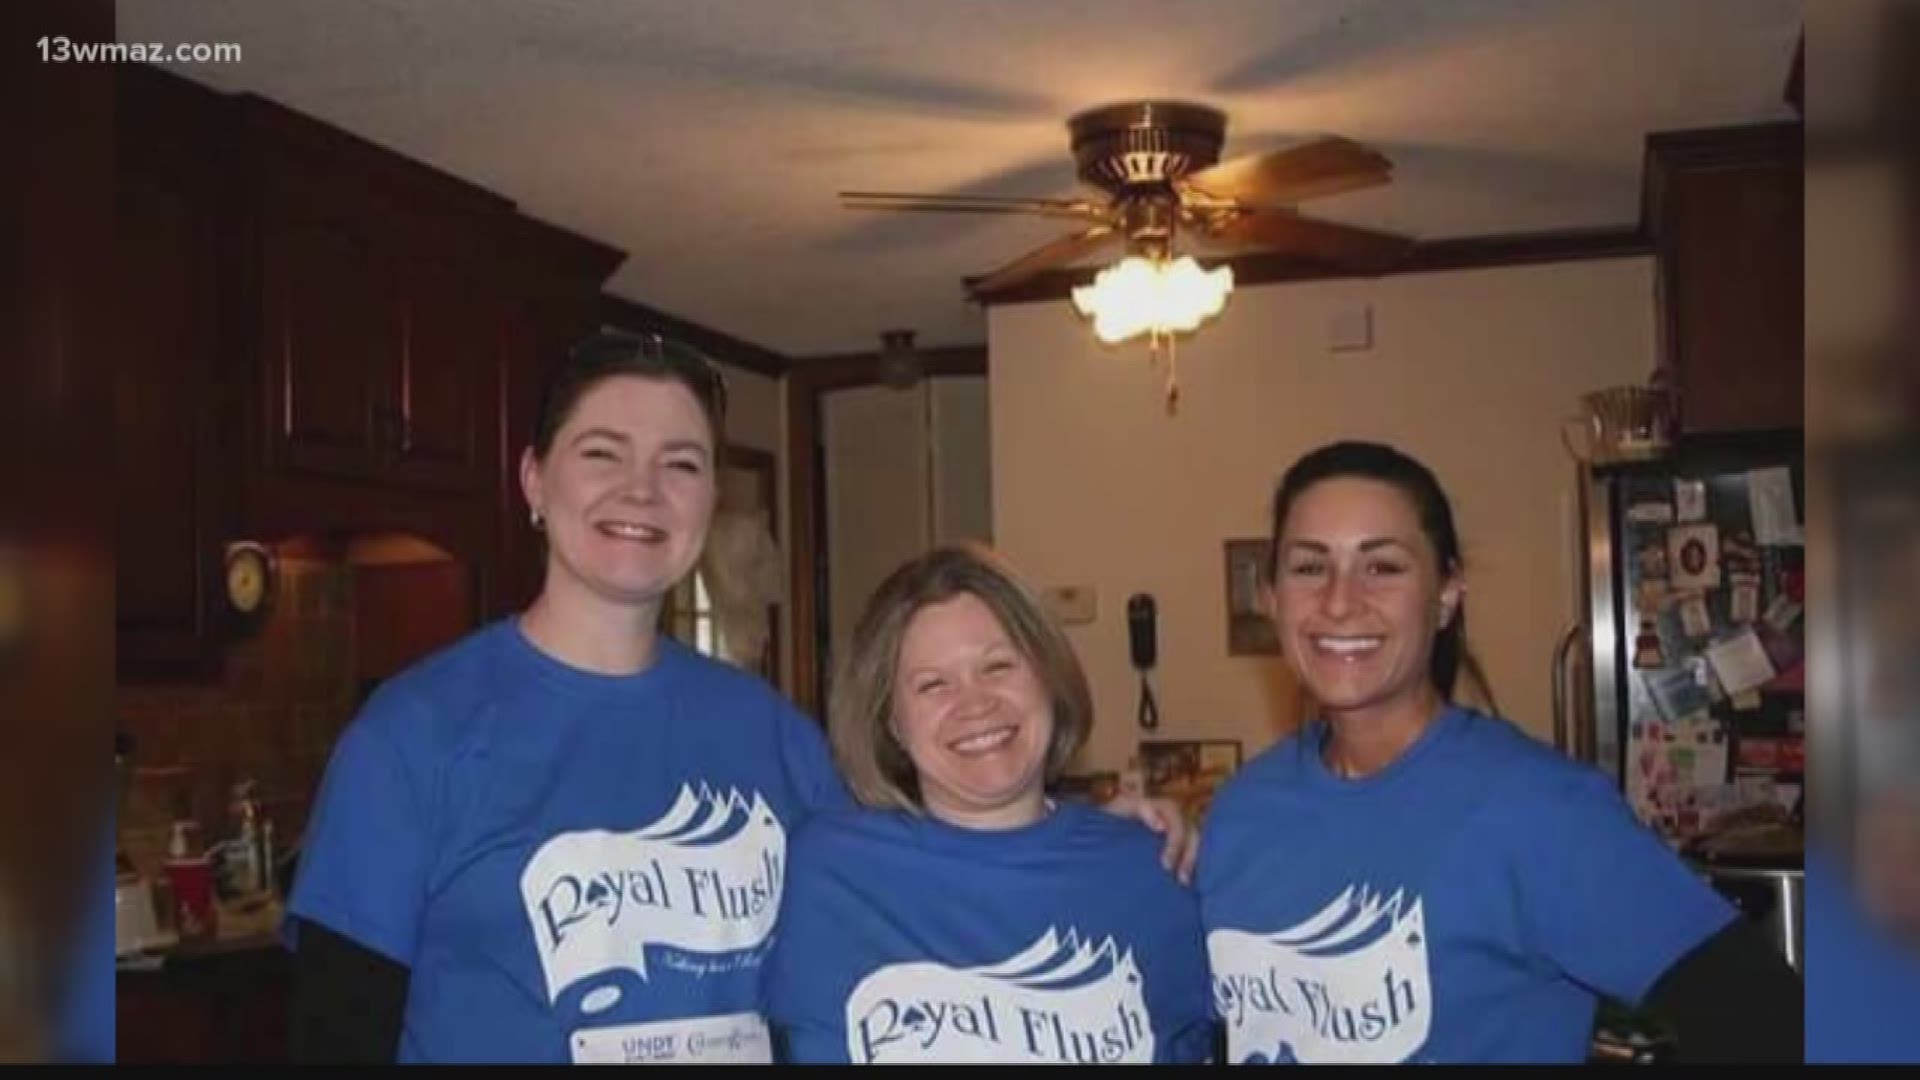 Family holds 5K in honor of woman that lost her battle to cancer